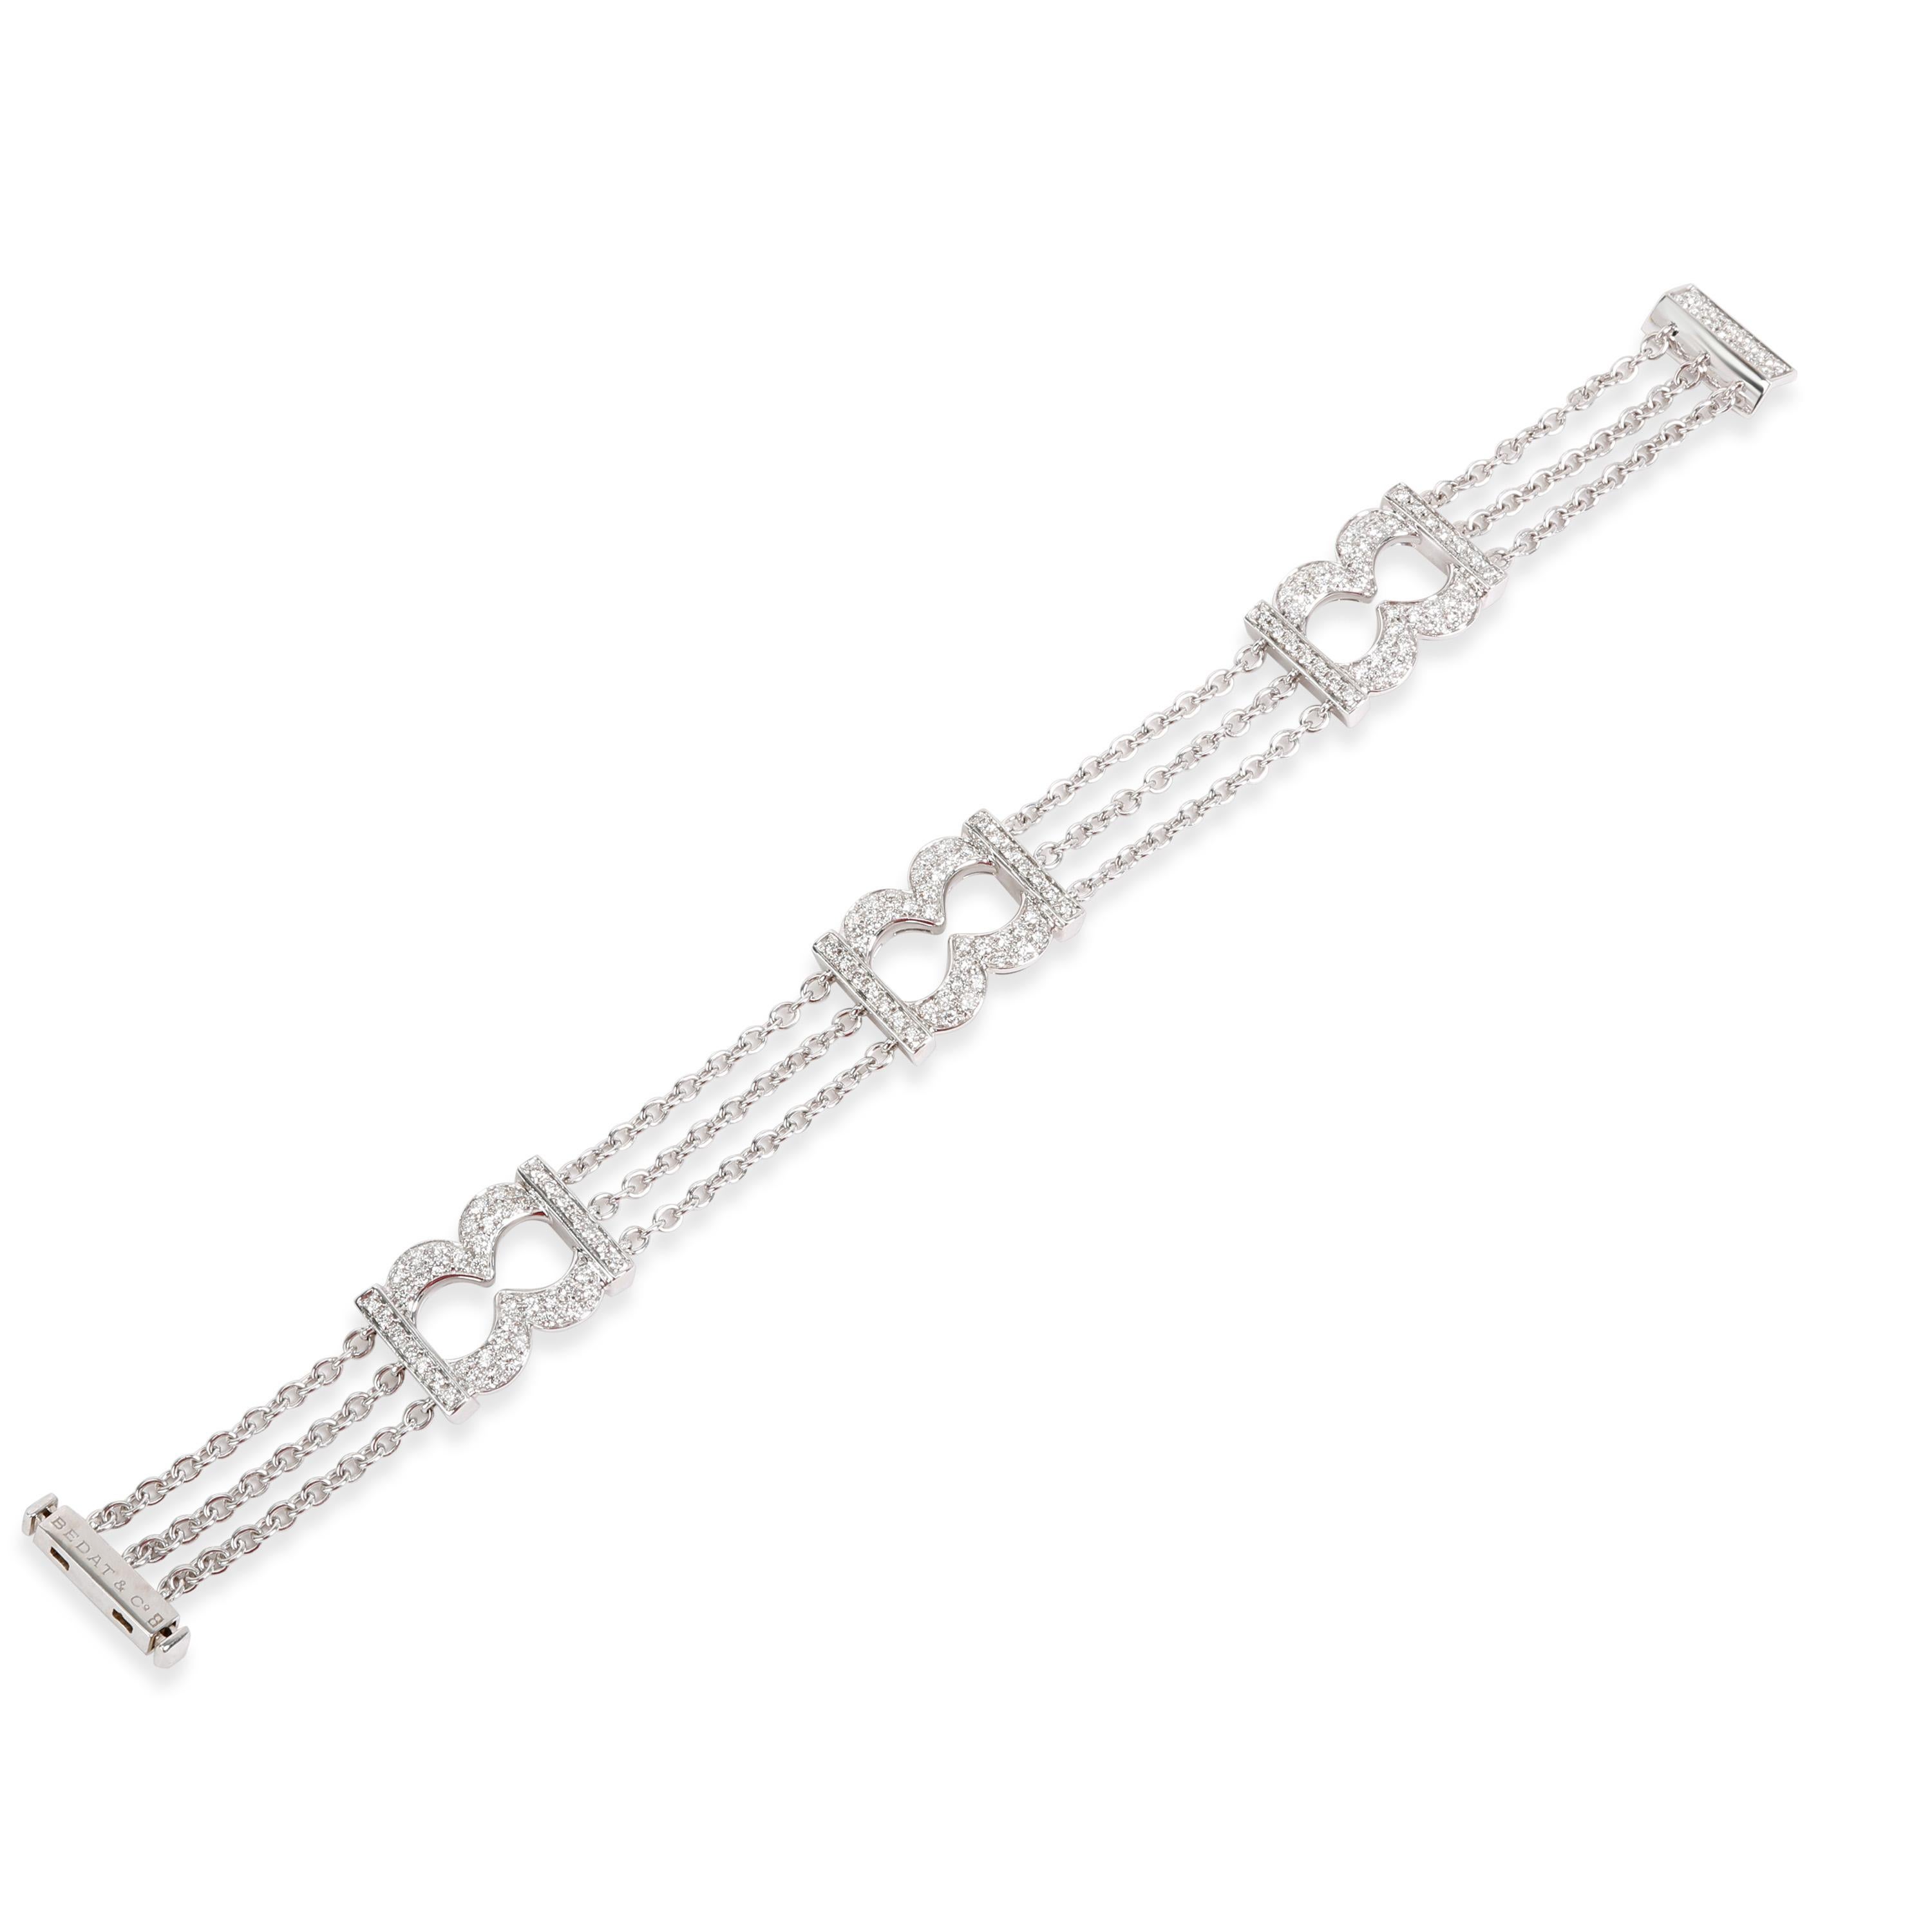 Bedat and Co. Orianne Collins Diamond Bracelet in 18 Karat White Gold 1.5 Carat In Excellent Condition In New York, NY